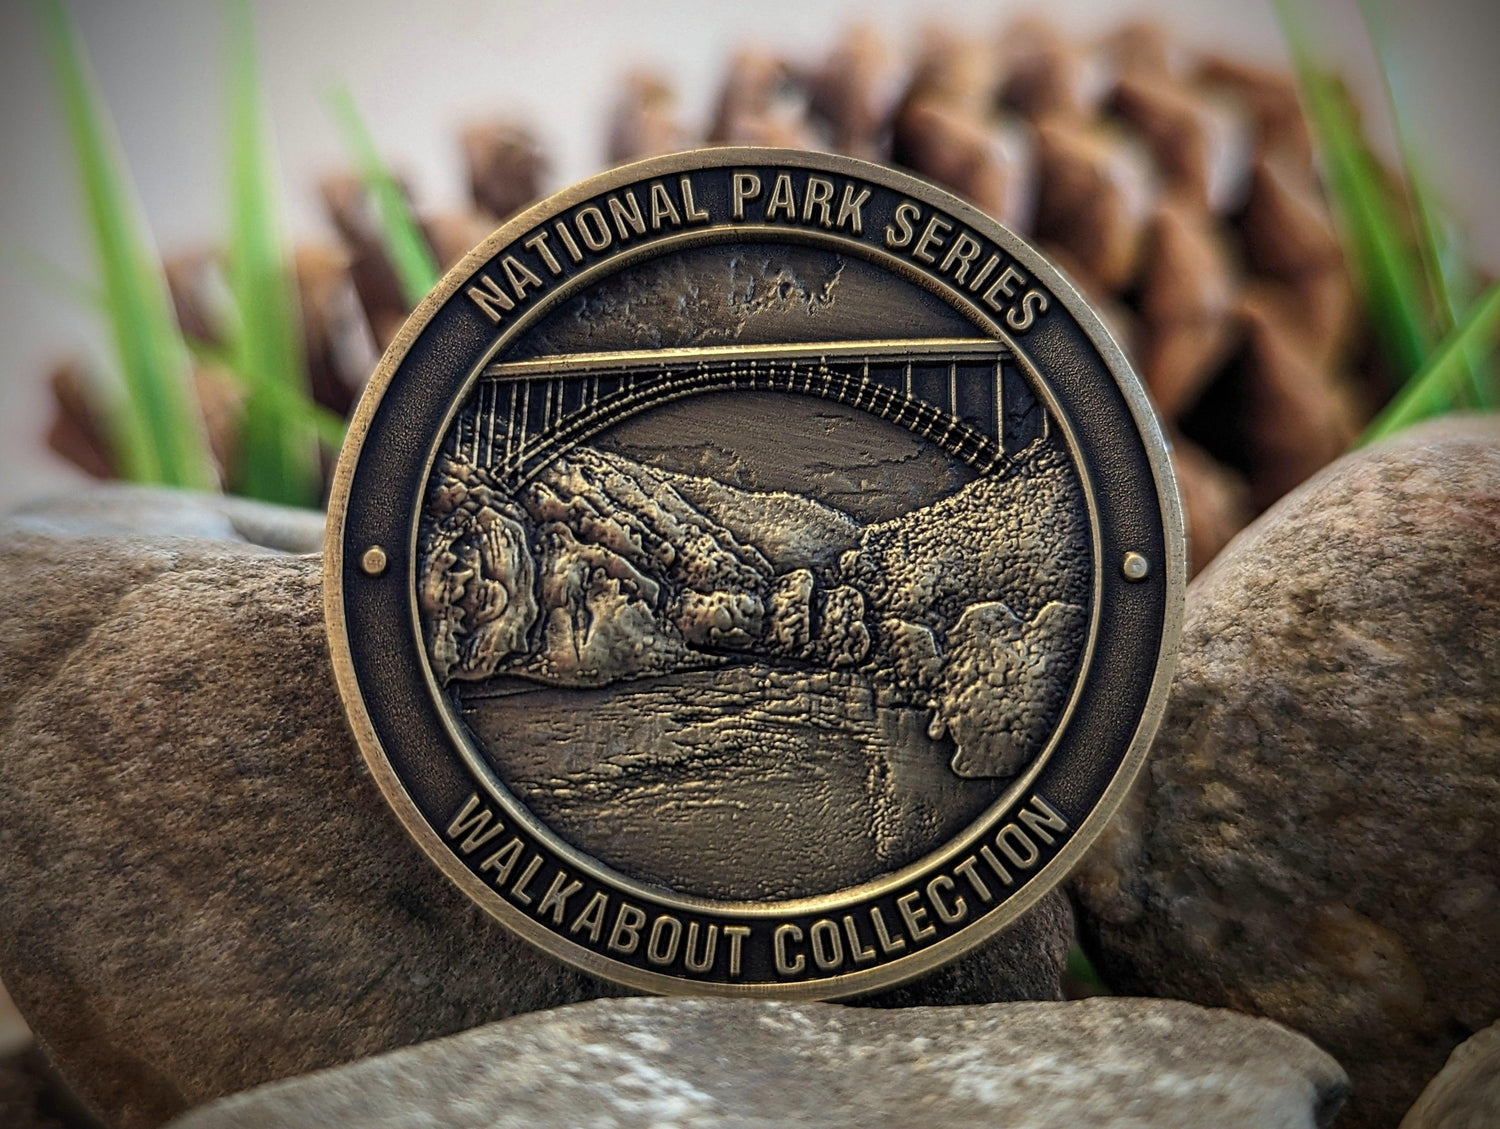 NEW RIVER GORGE NATIONAL PARK CHALLENGE COIN